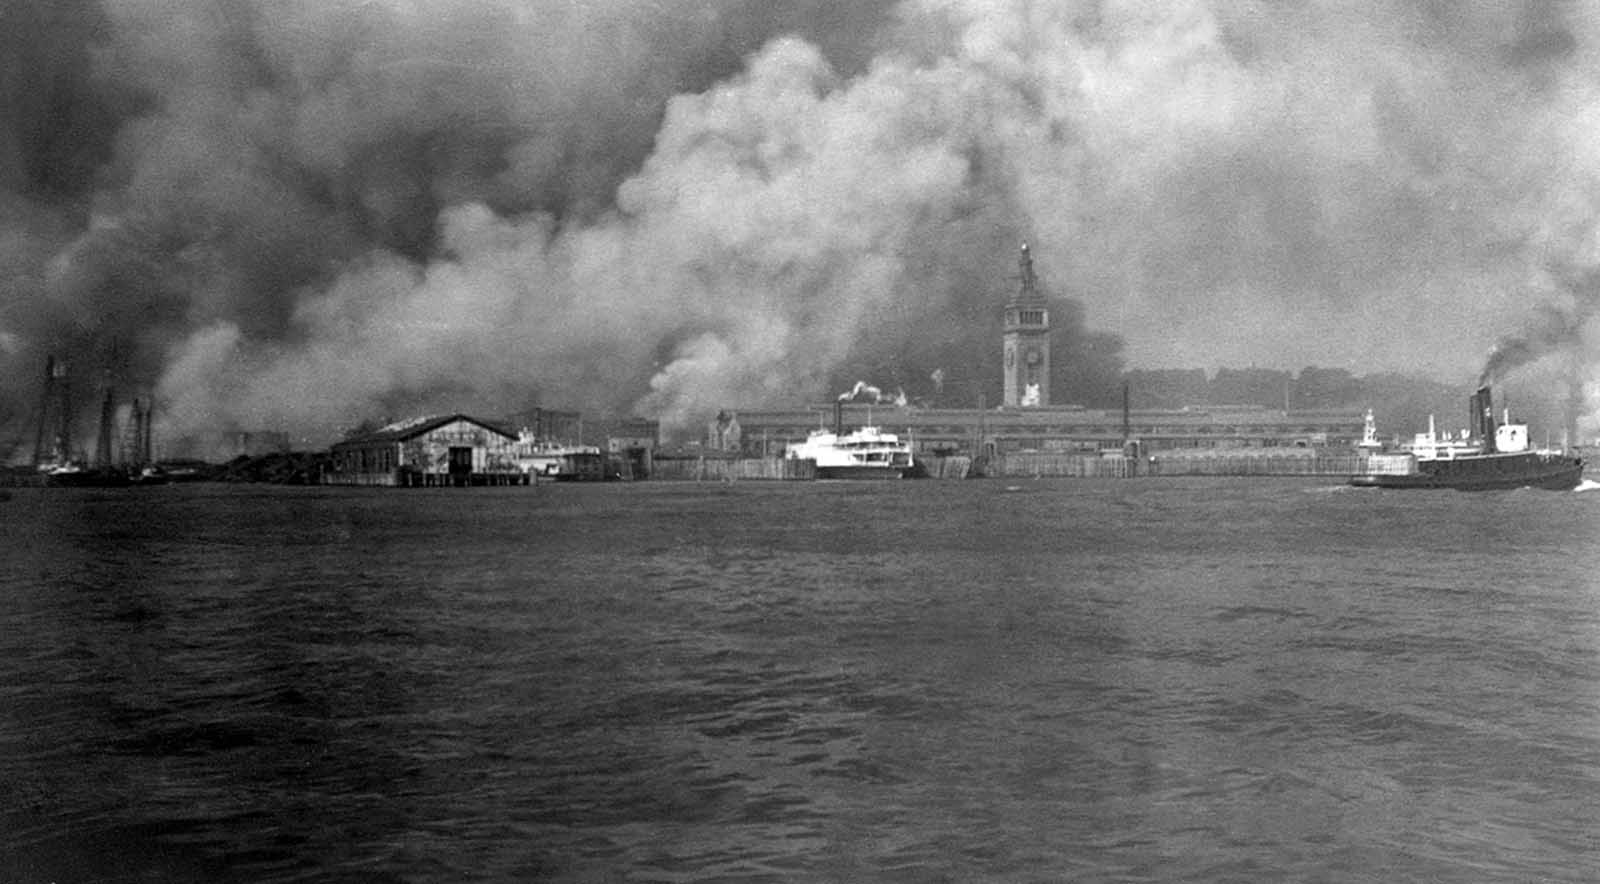 Smoke rises from burning buildings on the waterfront during the fire after the earthquake of 1906 in San Francisco, California.